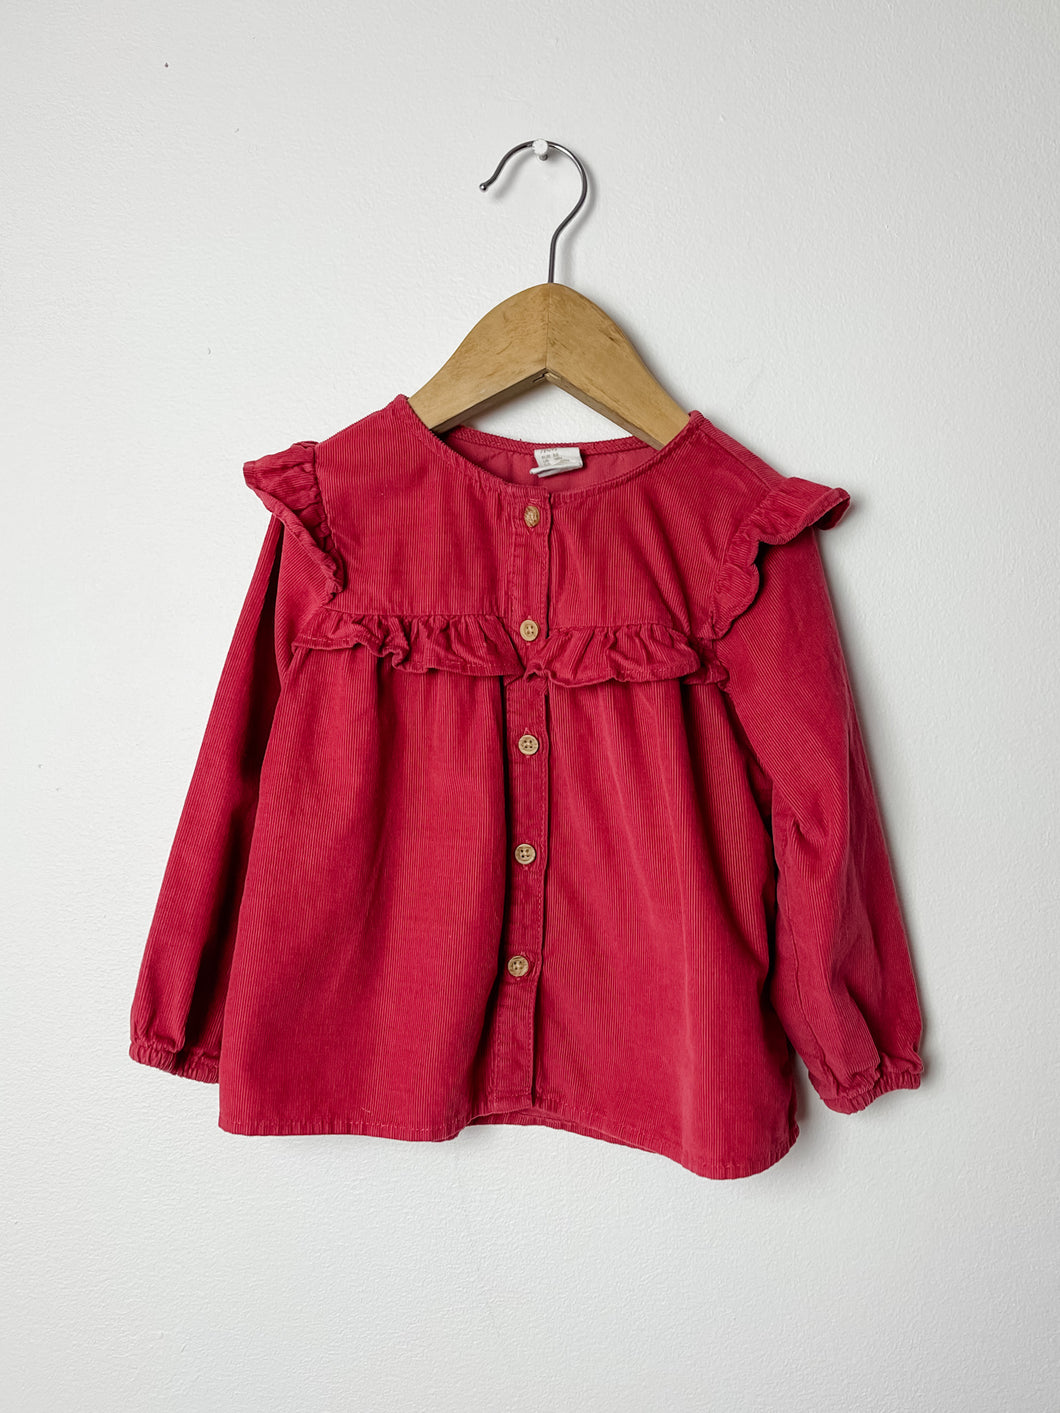 Red Corduroy H&M Shirt Size 12-18 Months